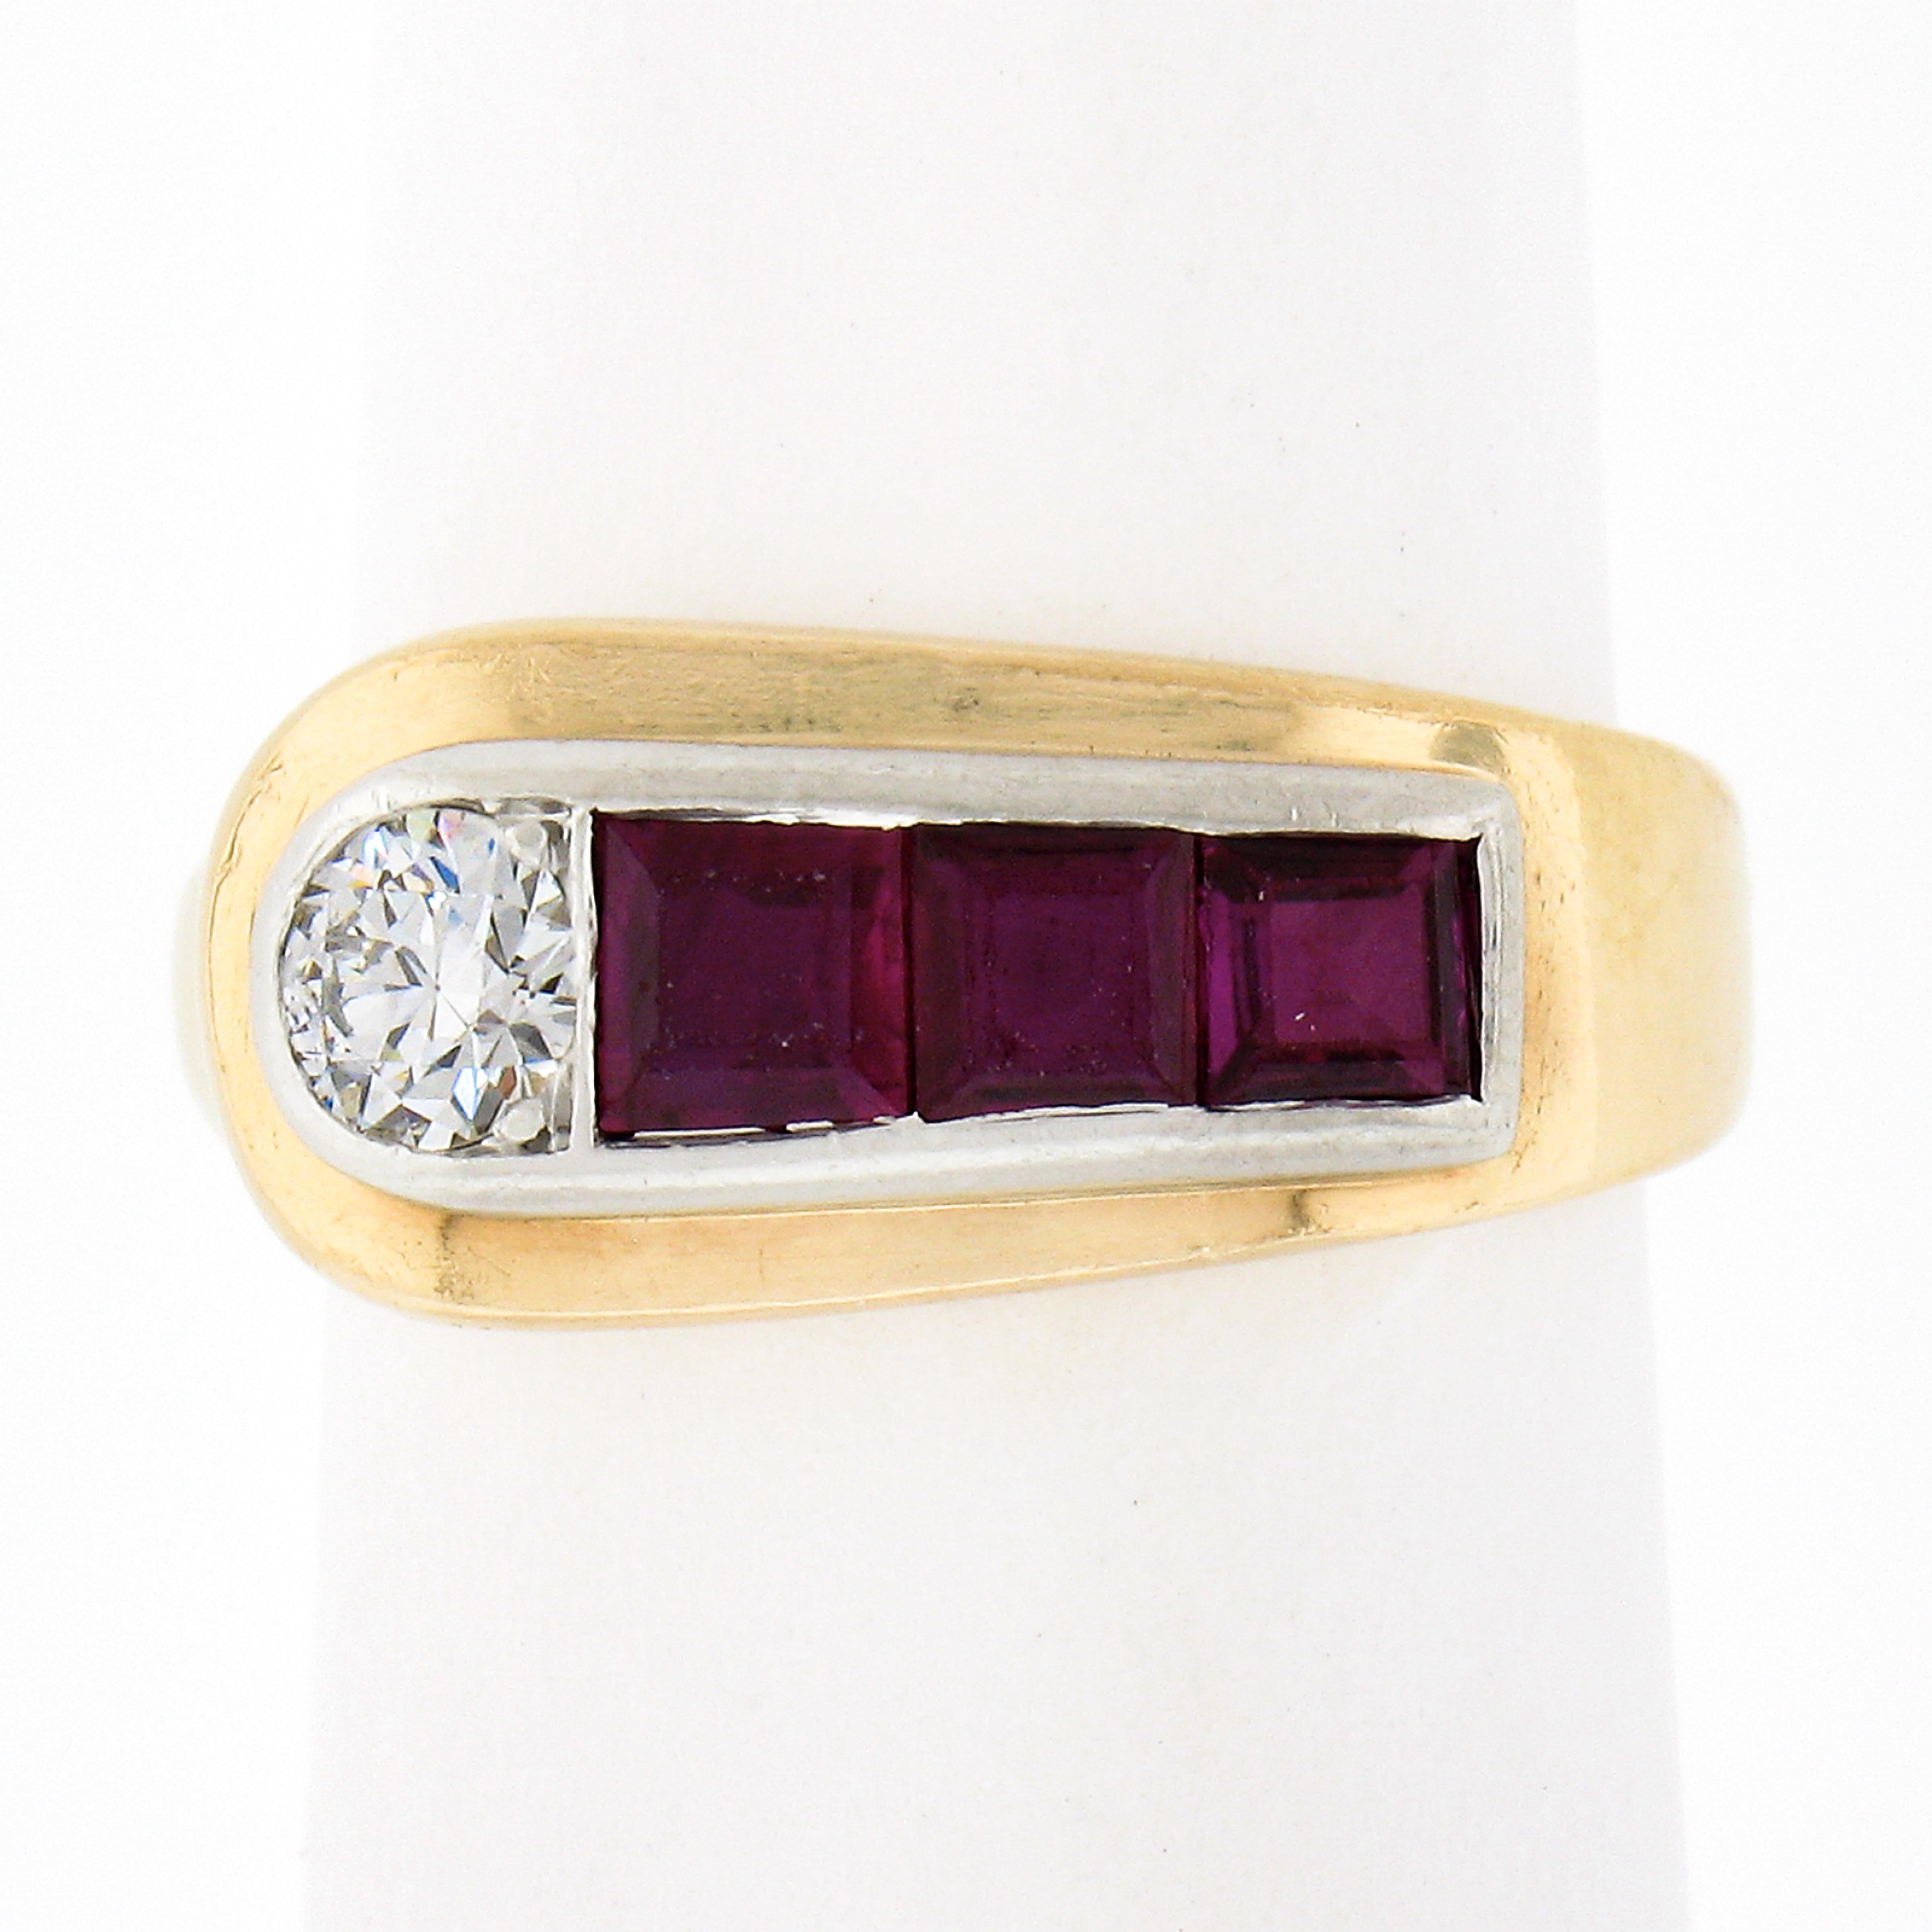 This unisex retro vintage ring by Maurice Tishman is crafted in solid 14k Yellow gold and platinum, it features like buckle design adorned with 1 fine diamond and 3 ruby stones throughout its platinum top. The square step cut rubies show gorgeous